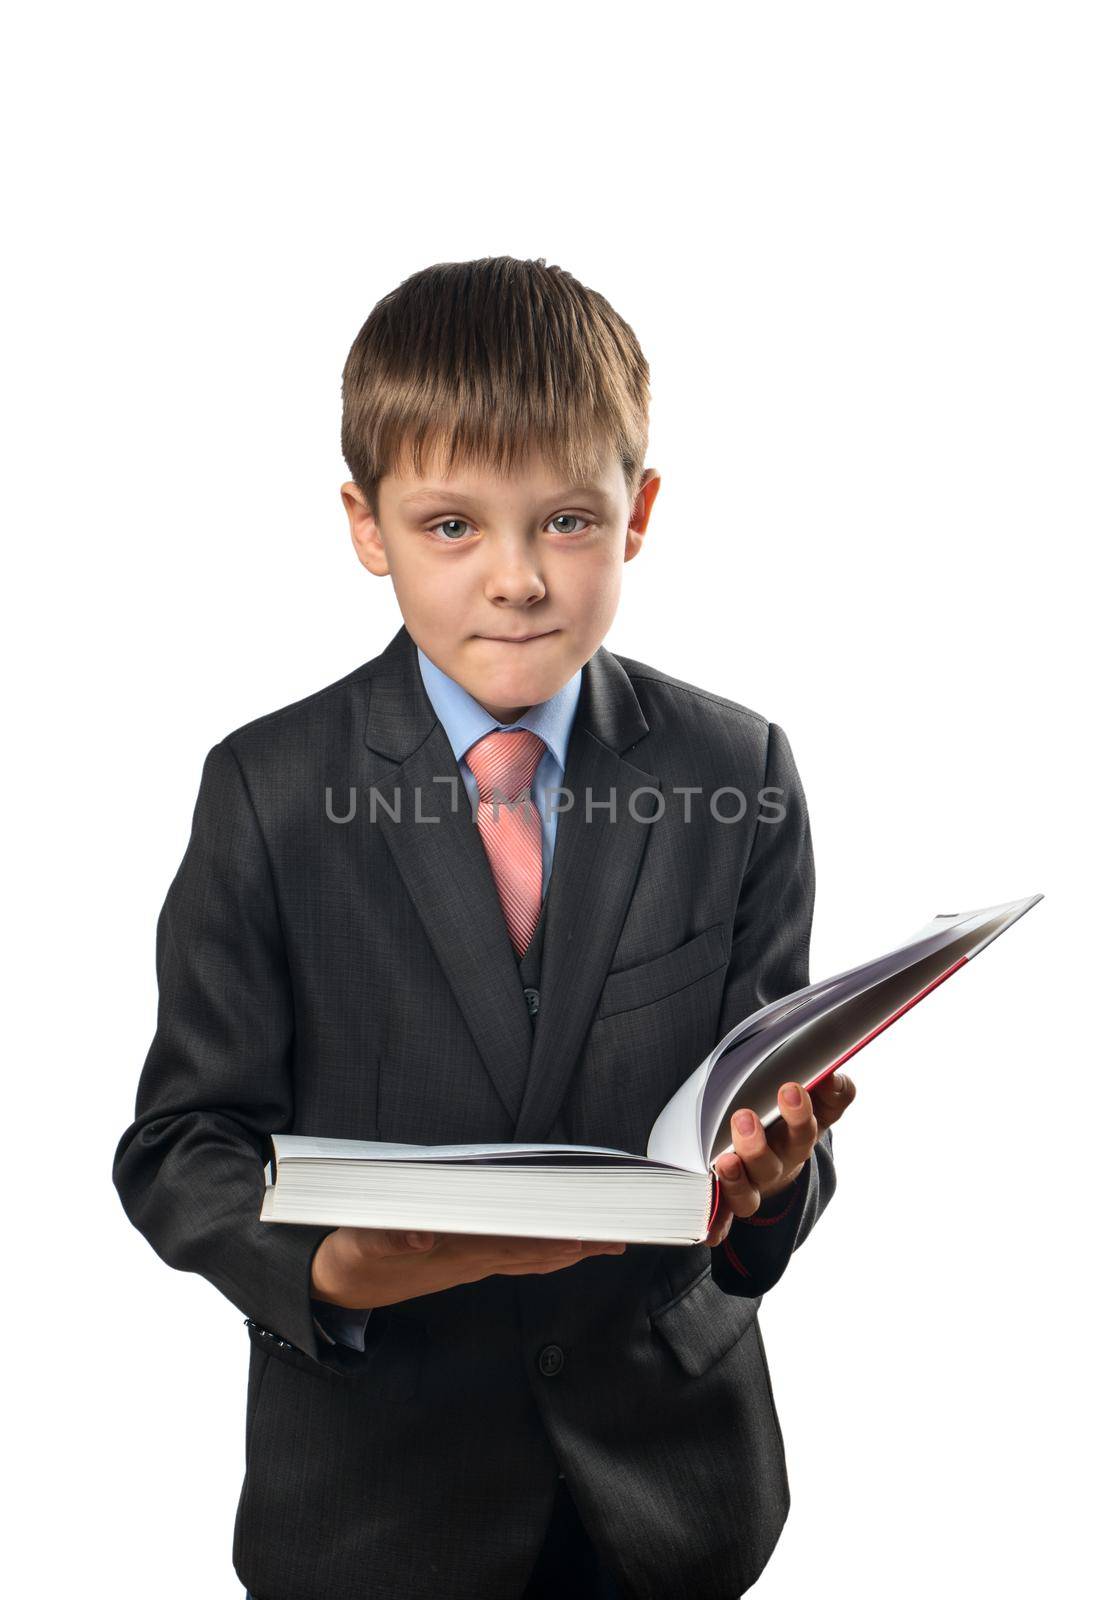 Cheerful schoolboy holding an open book in his hands on a white background